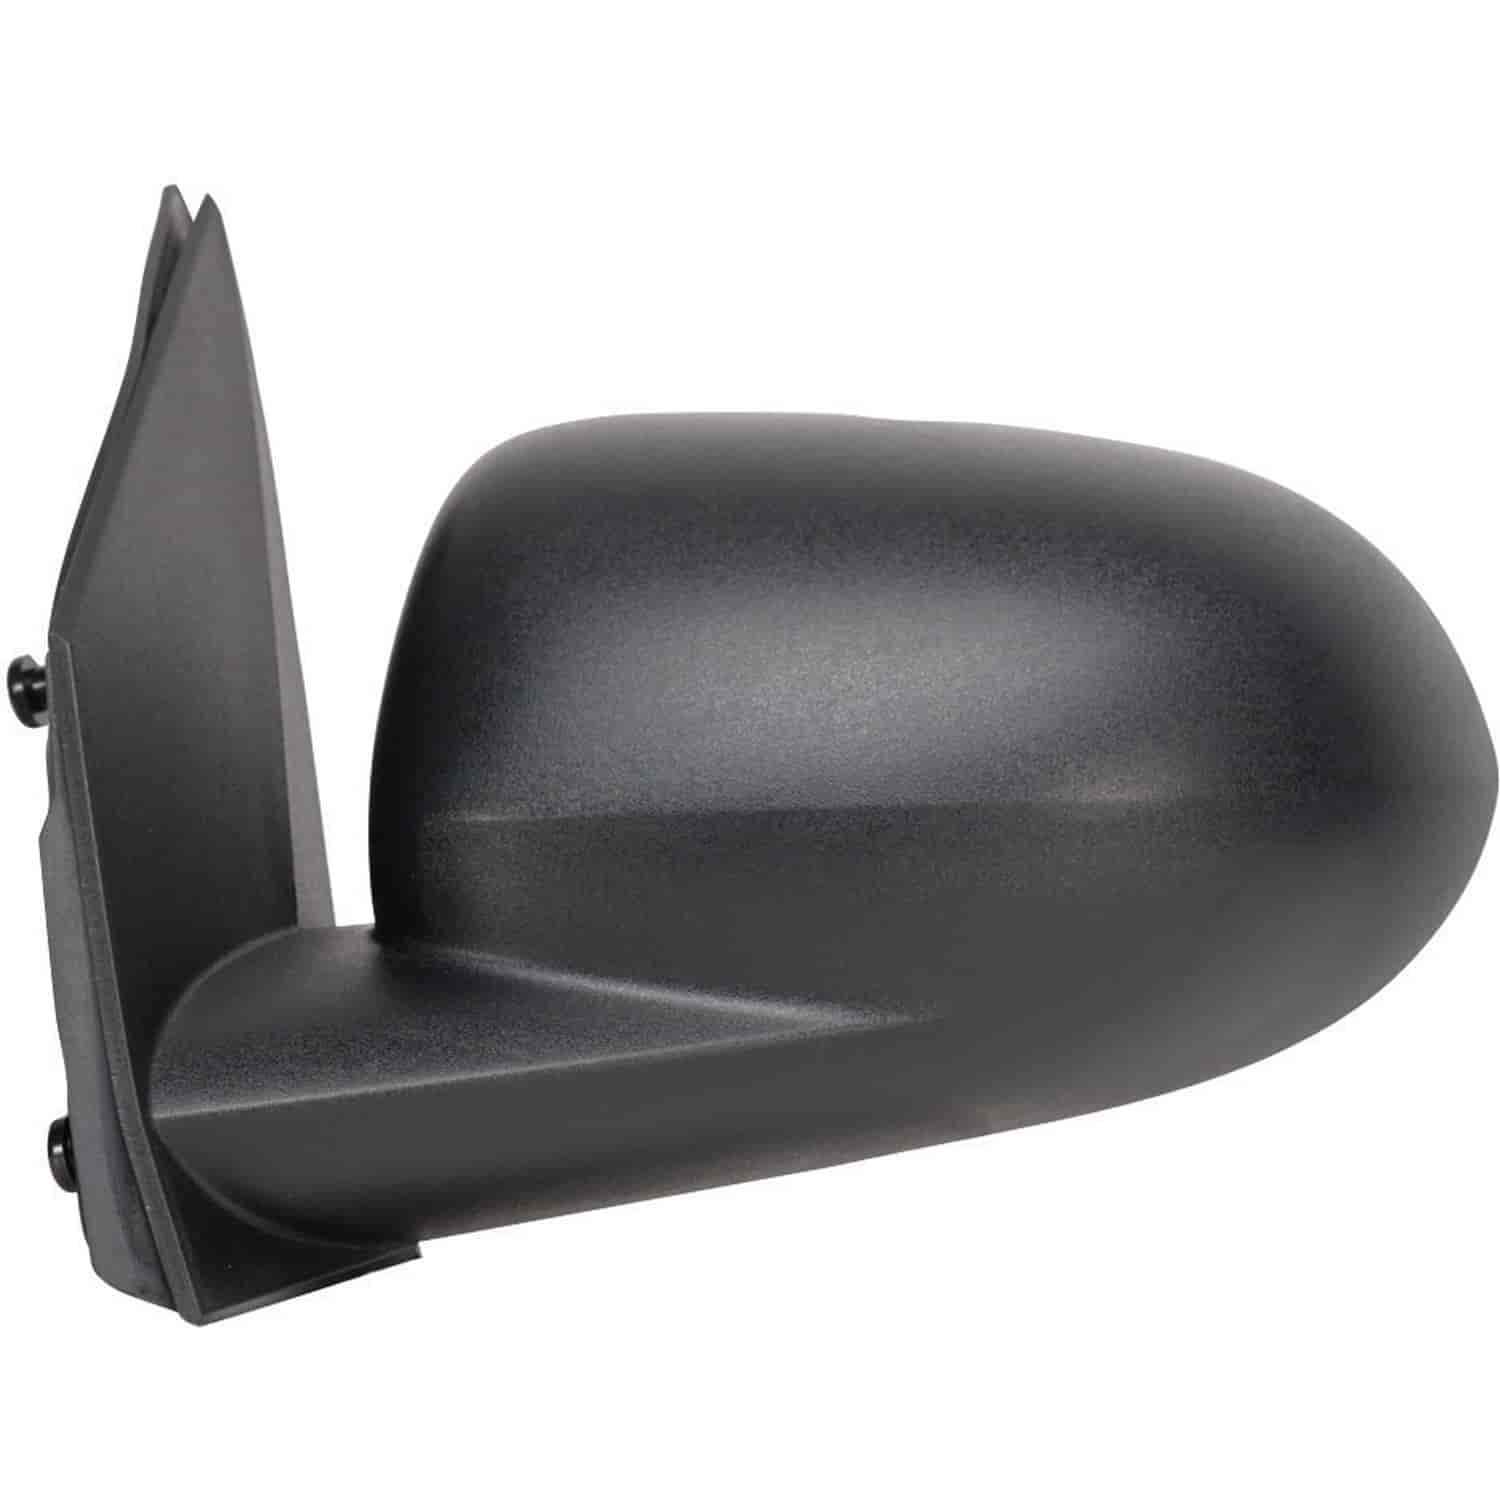 OEM Style Replacement mirror for 07-12 Dodge Caliber driver side mirror tested to fit and function l